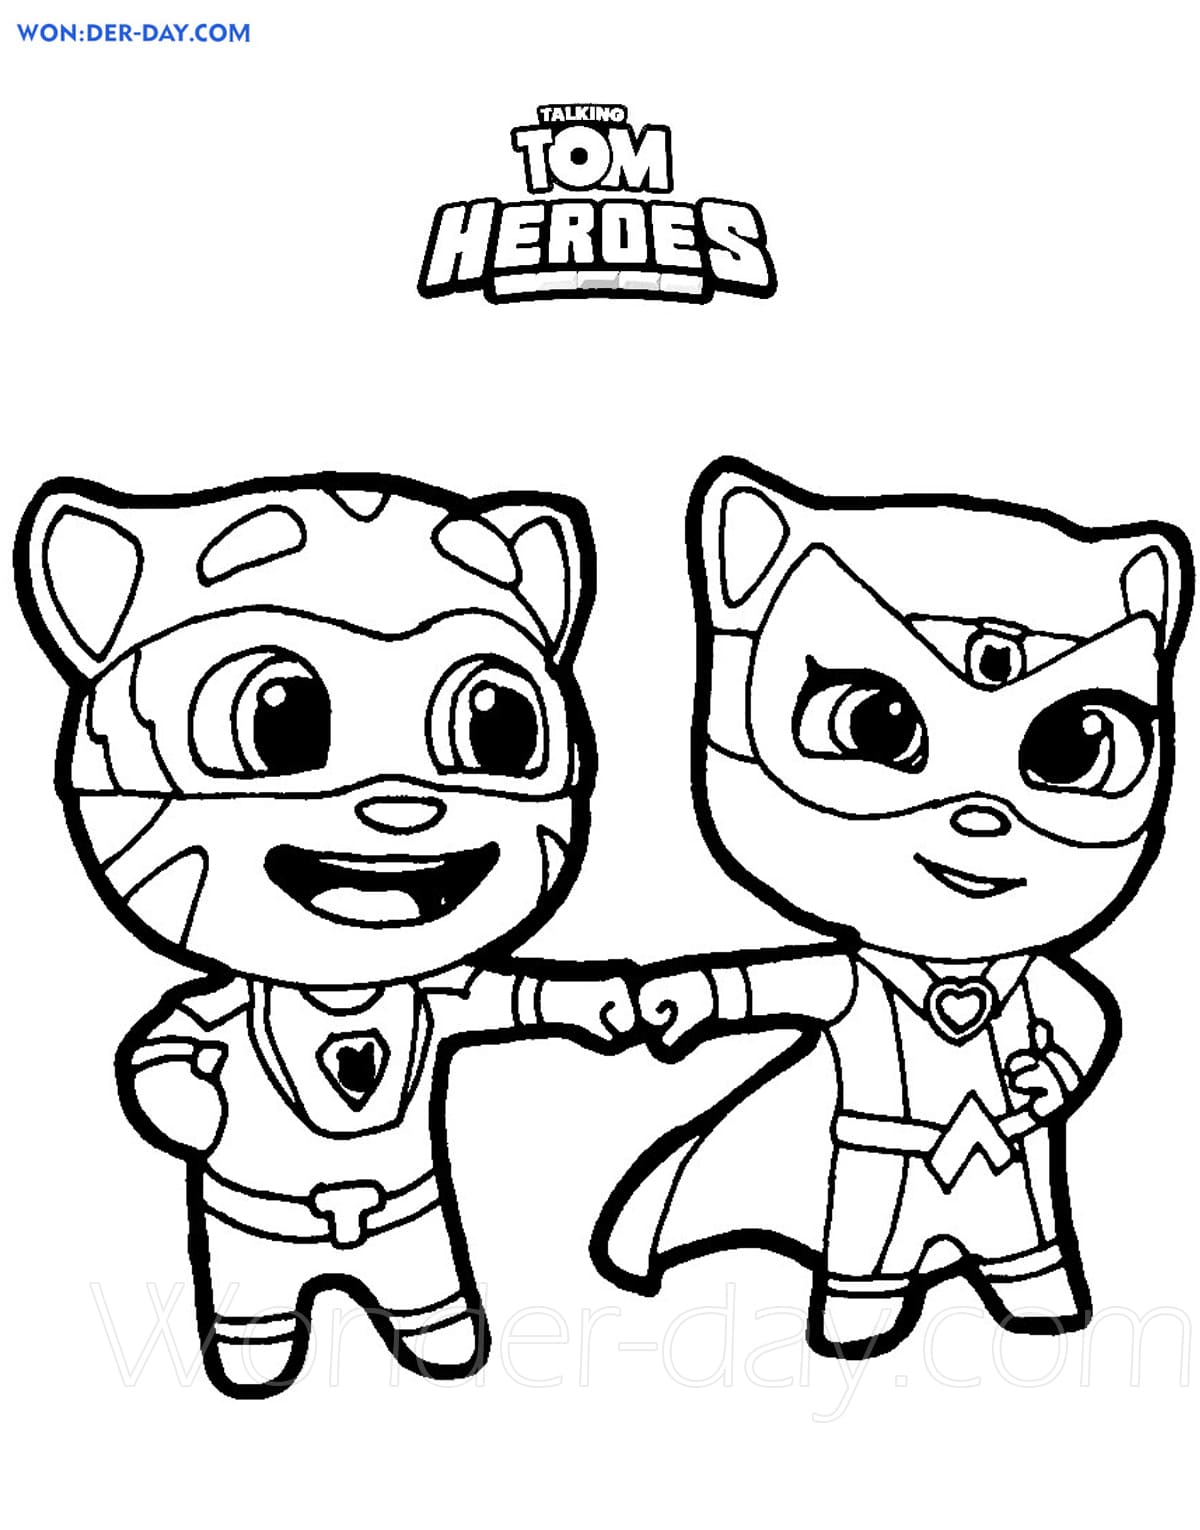 Talking Tom Heroes Coloring Pages   Print for Free